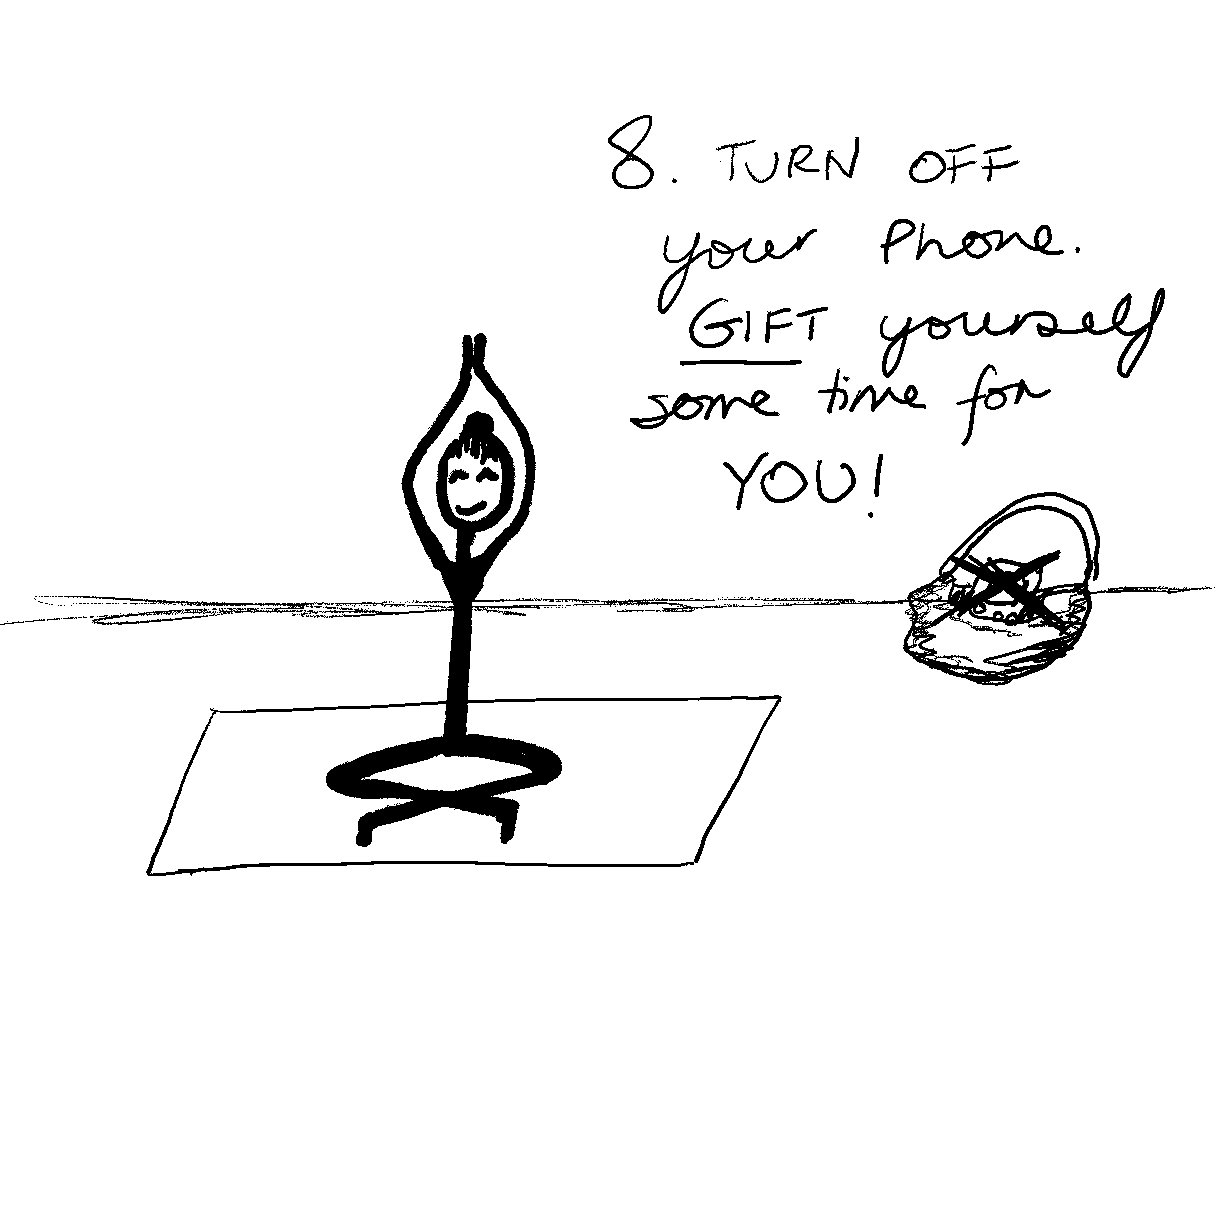 Yoga Class Rule 8: Turn off your phone